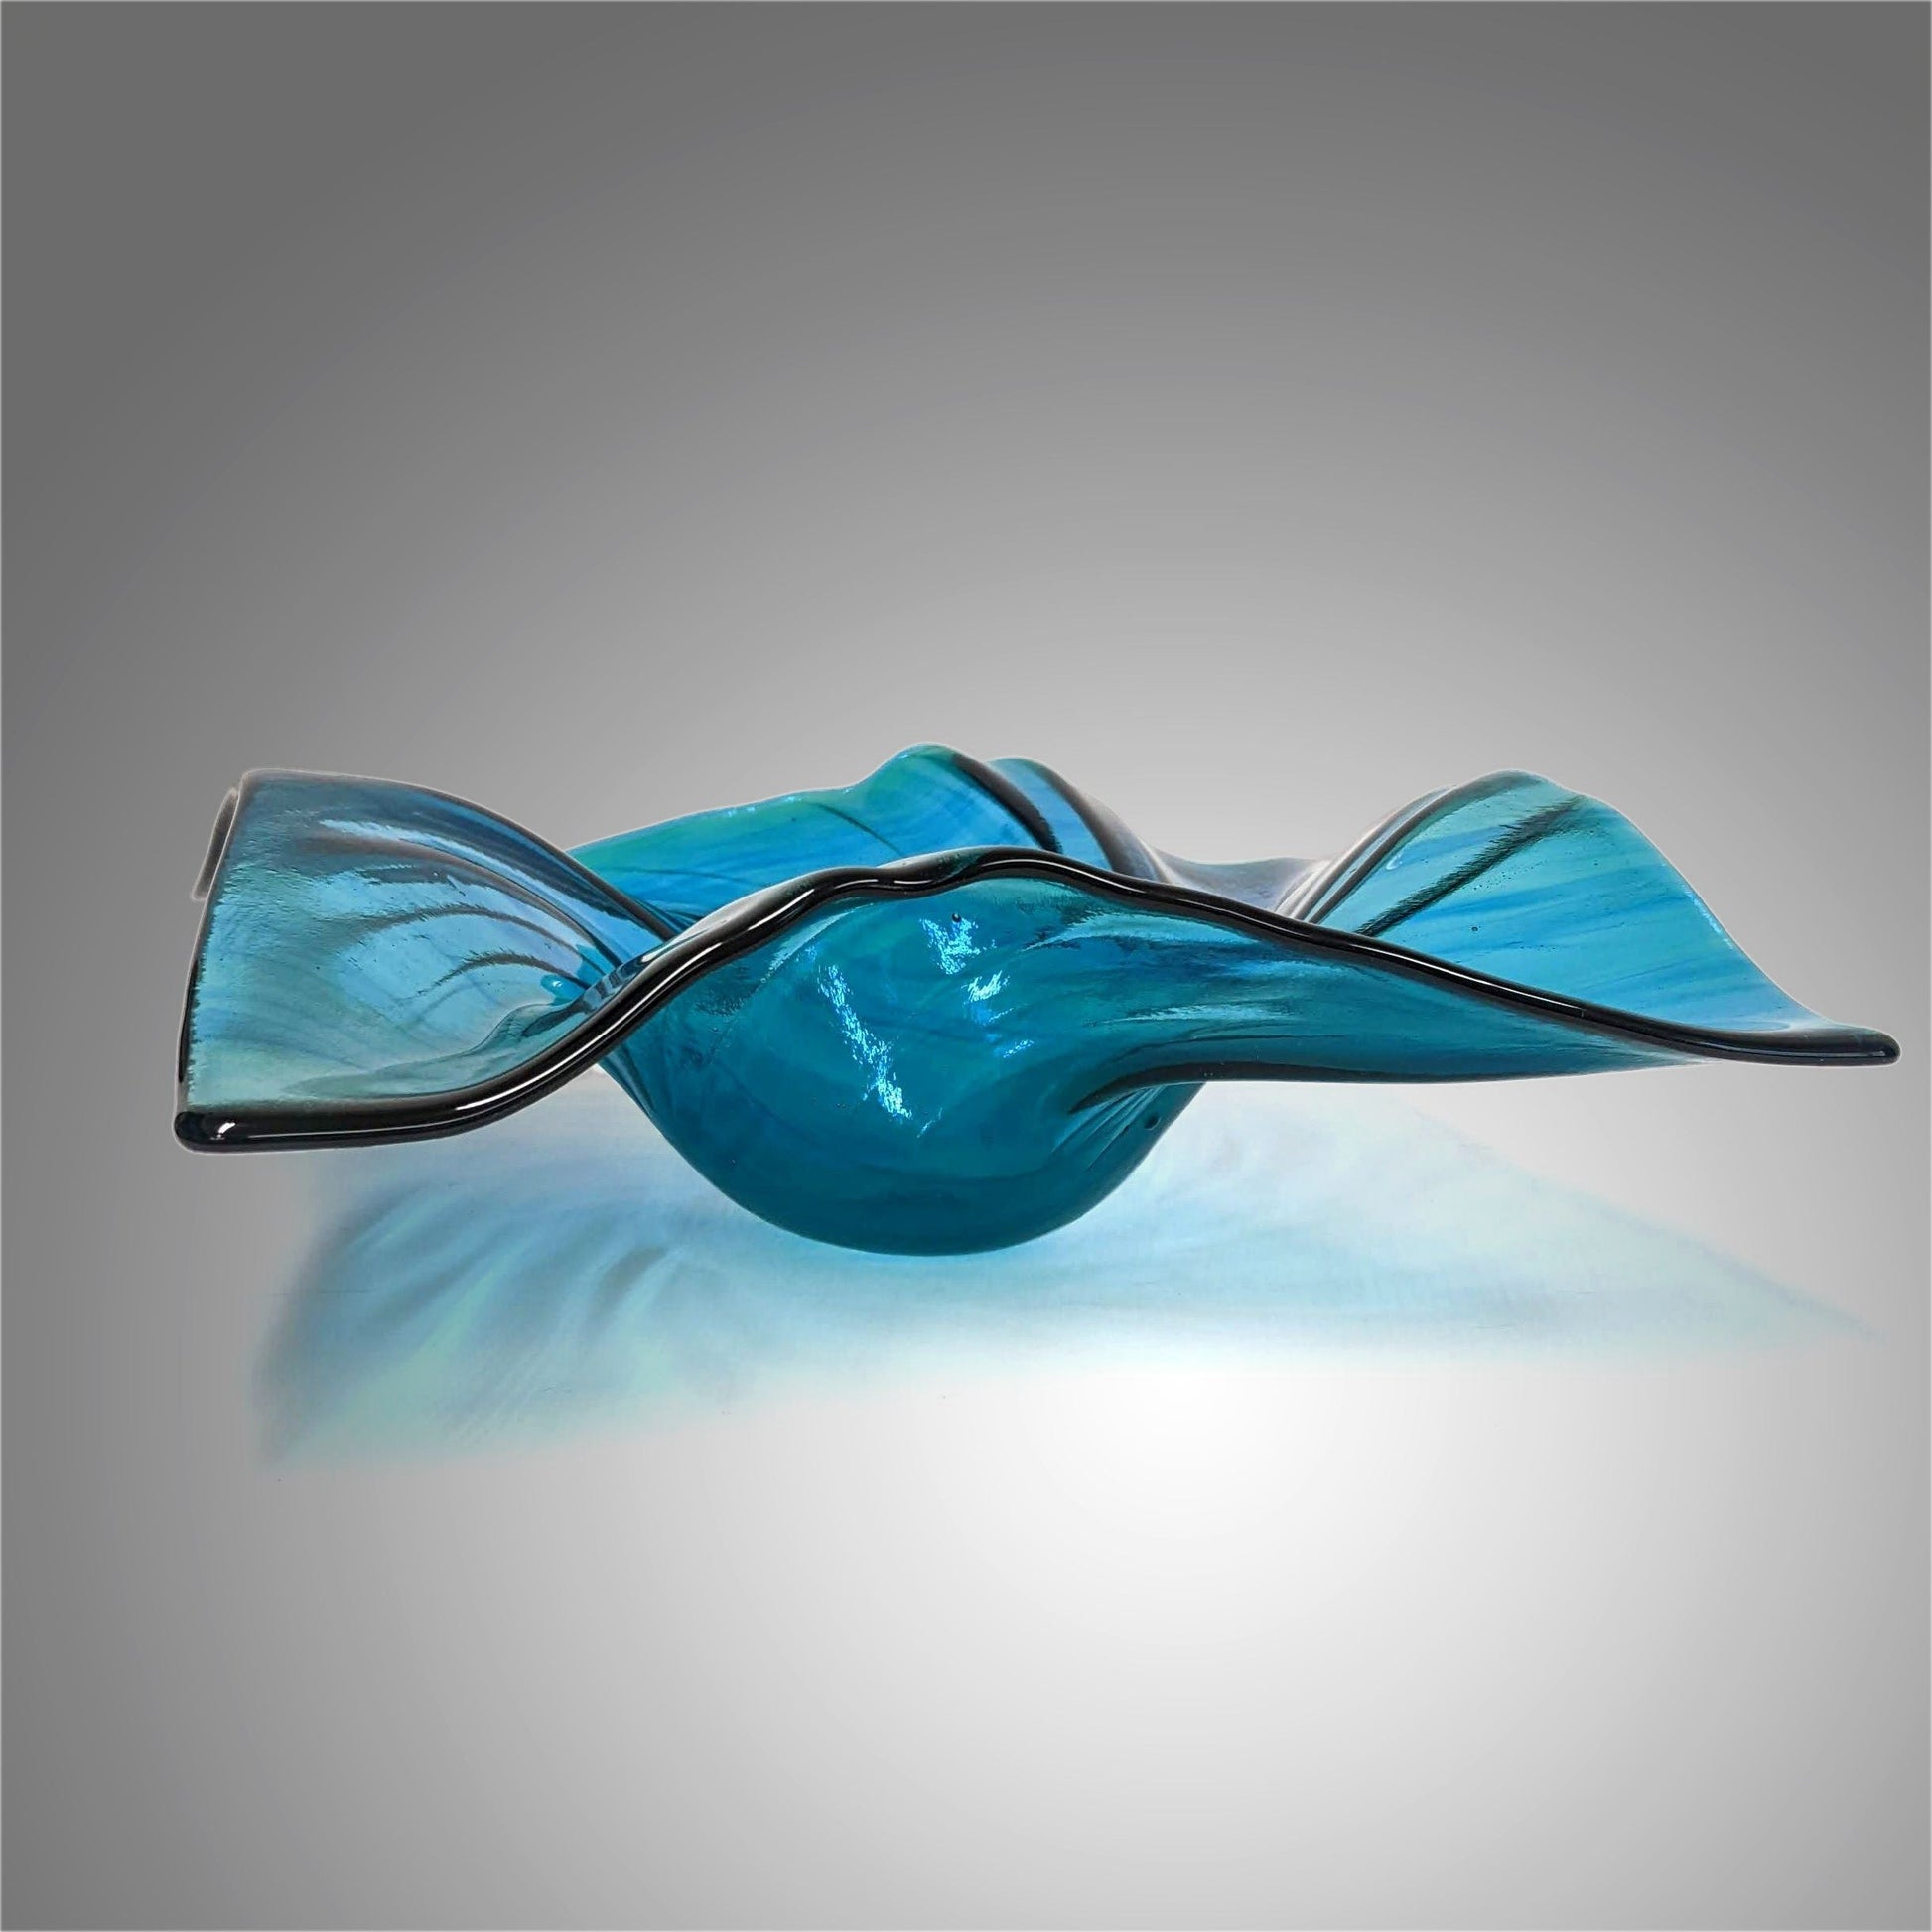 Glass Art Wave Bowl in Aqua Teal Turquoise | Modern Decorative Centerpiece Bowls | Handmade in Ohio | Unique Gift Ideas